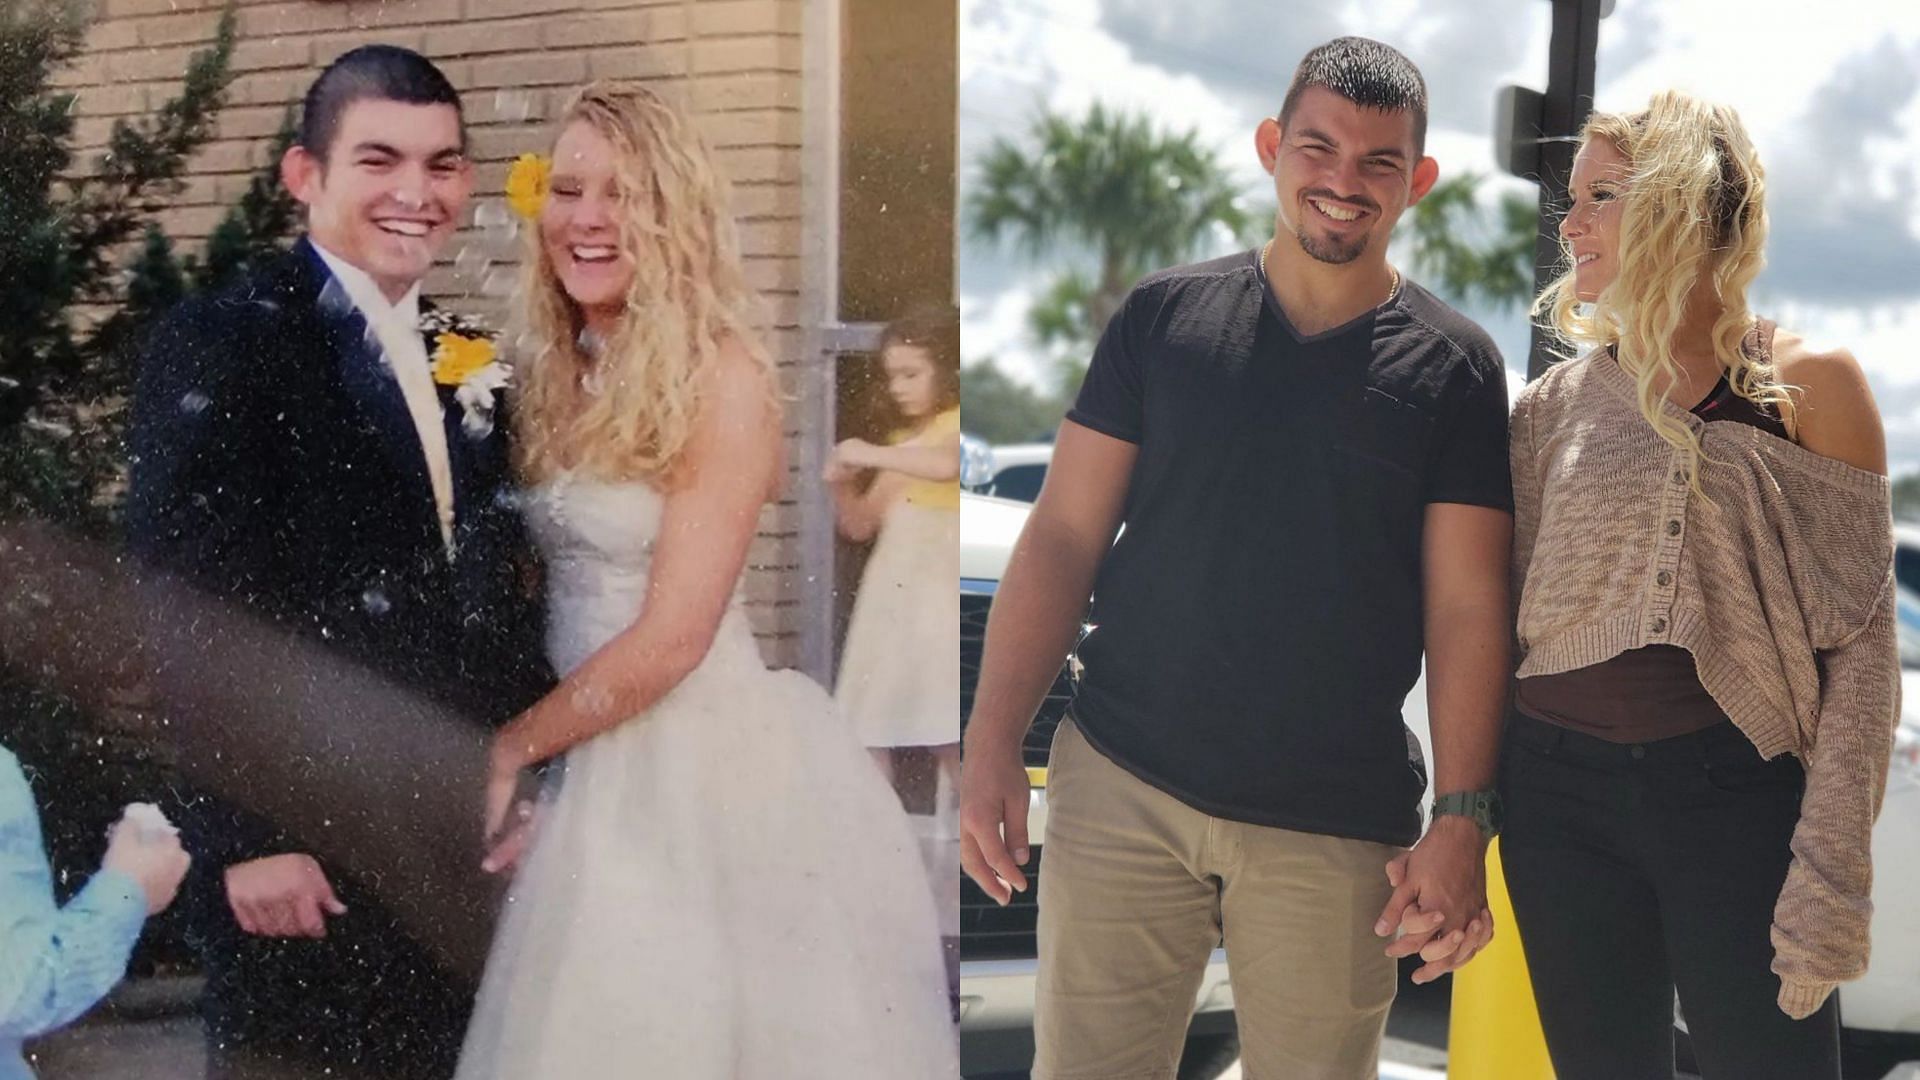 Lacey Evans married her husband, Alfonso Estrella-Kadlec, when she was 19